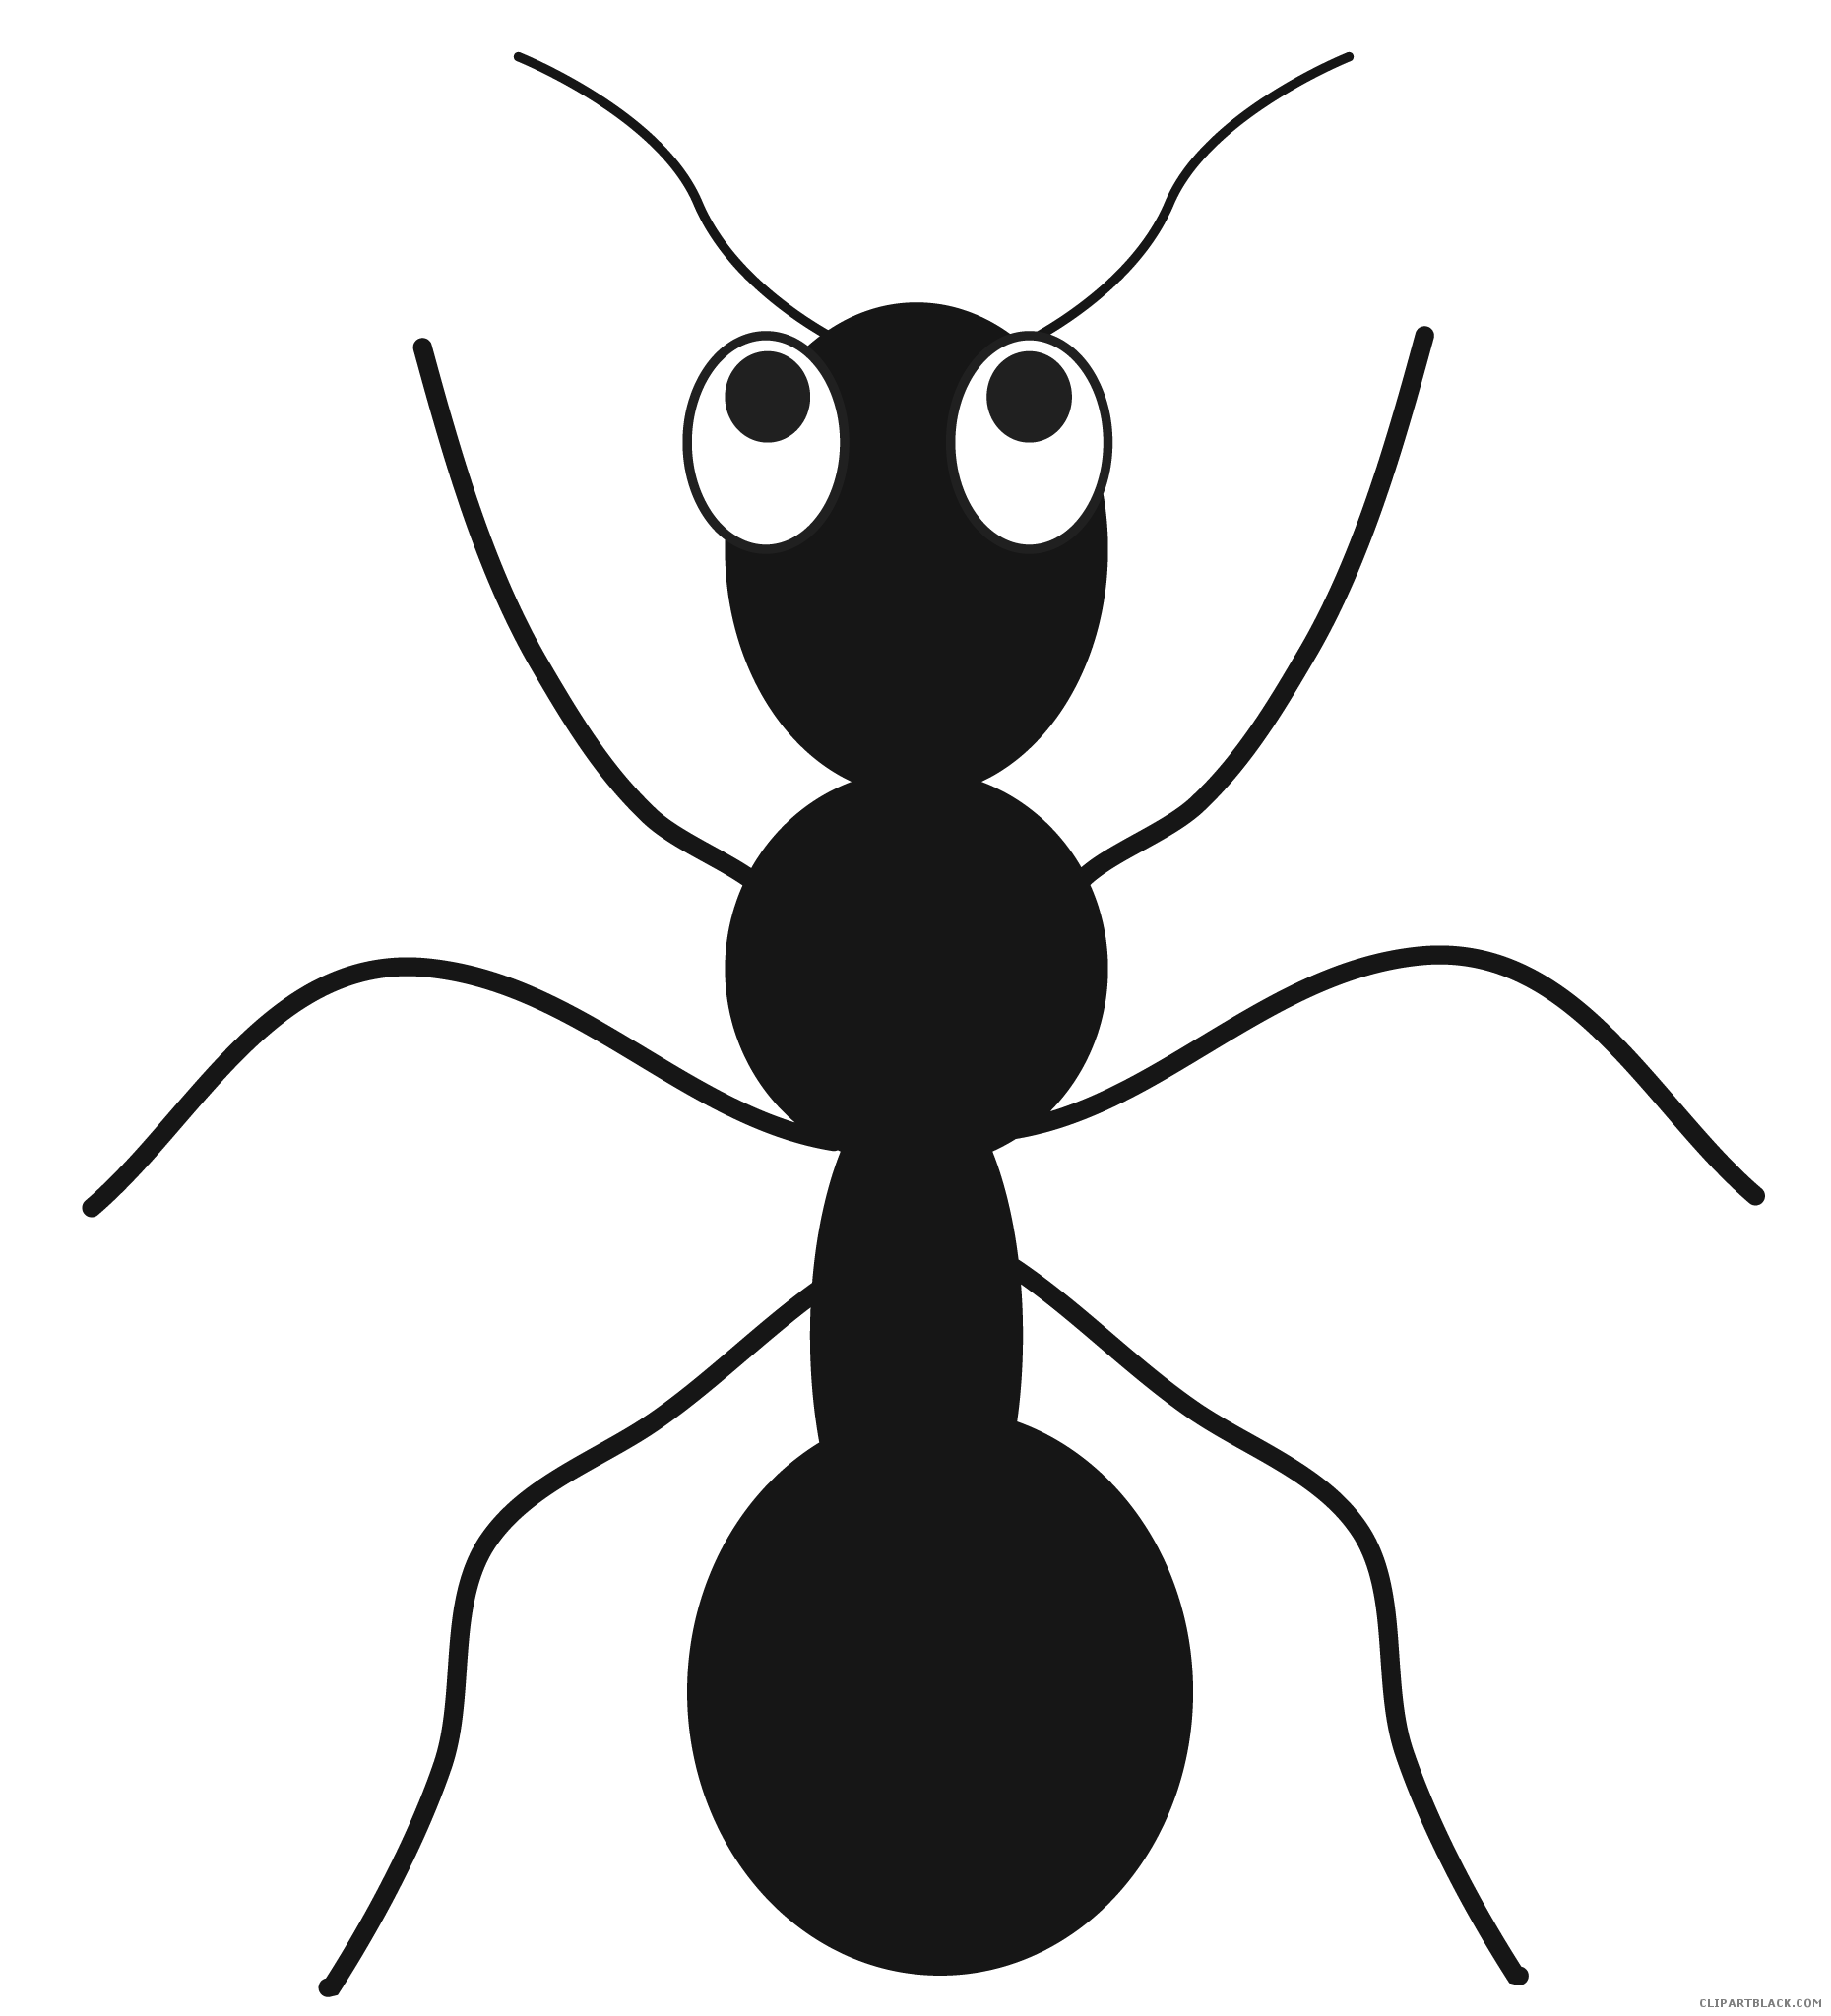 Black and white ants. Hills clipart ant